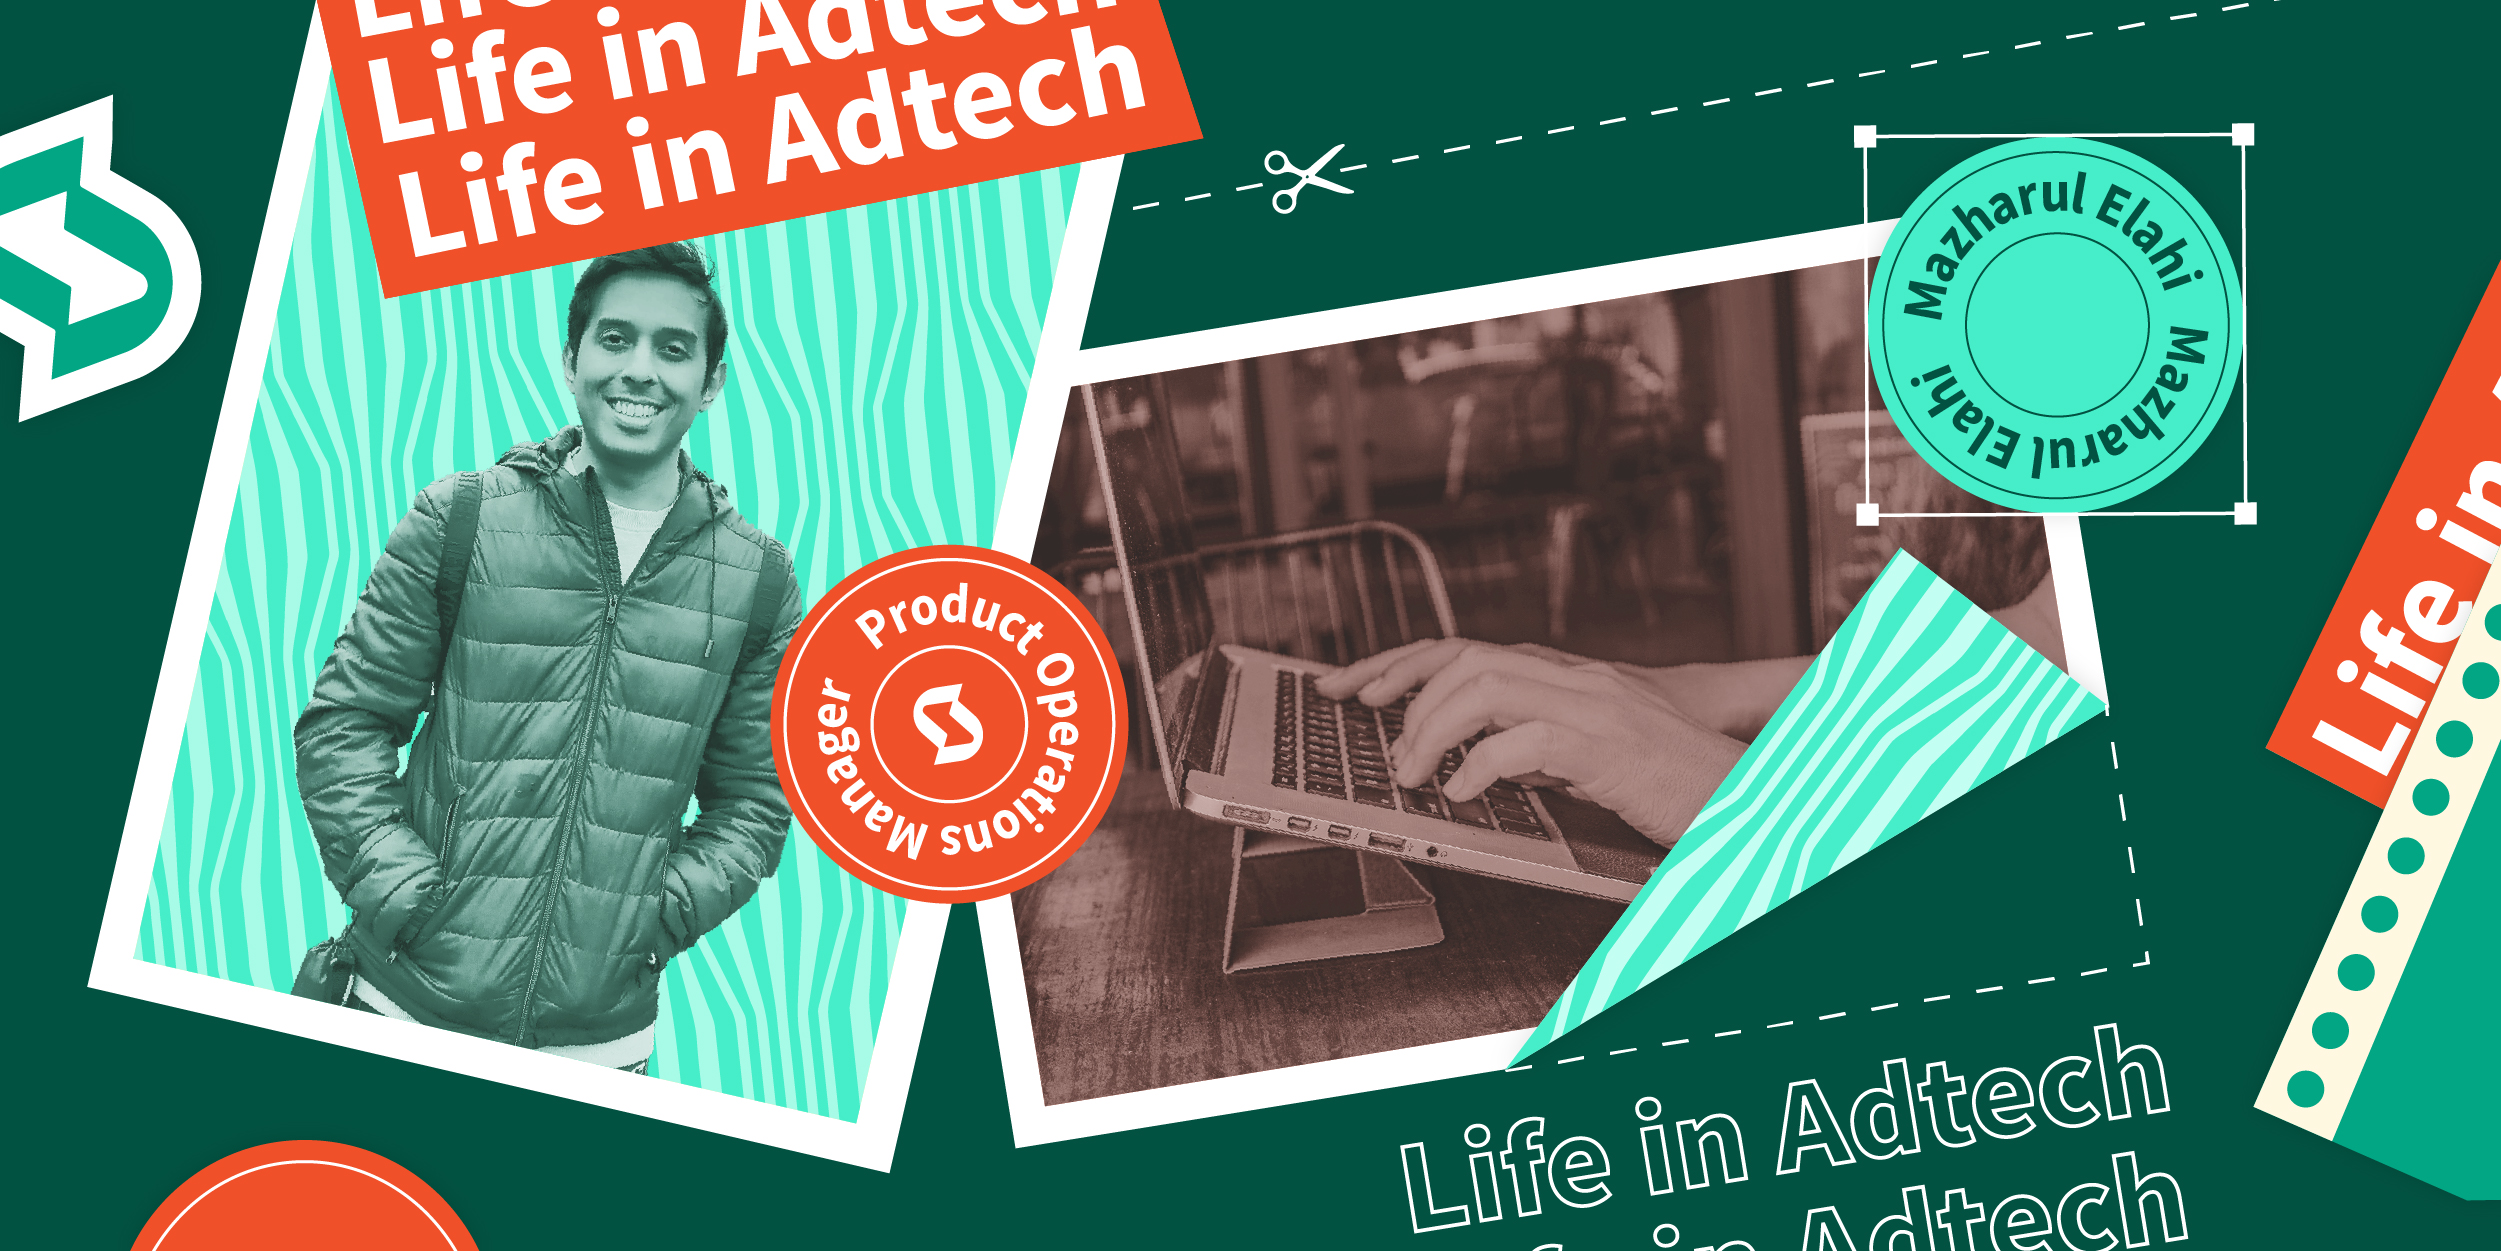 a black and white photo of a smiling man overlayed on a green background with text that reads "life in adtech"